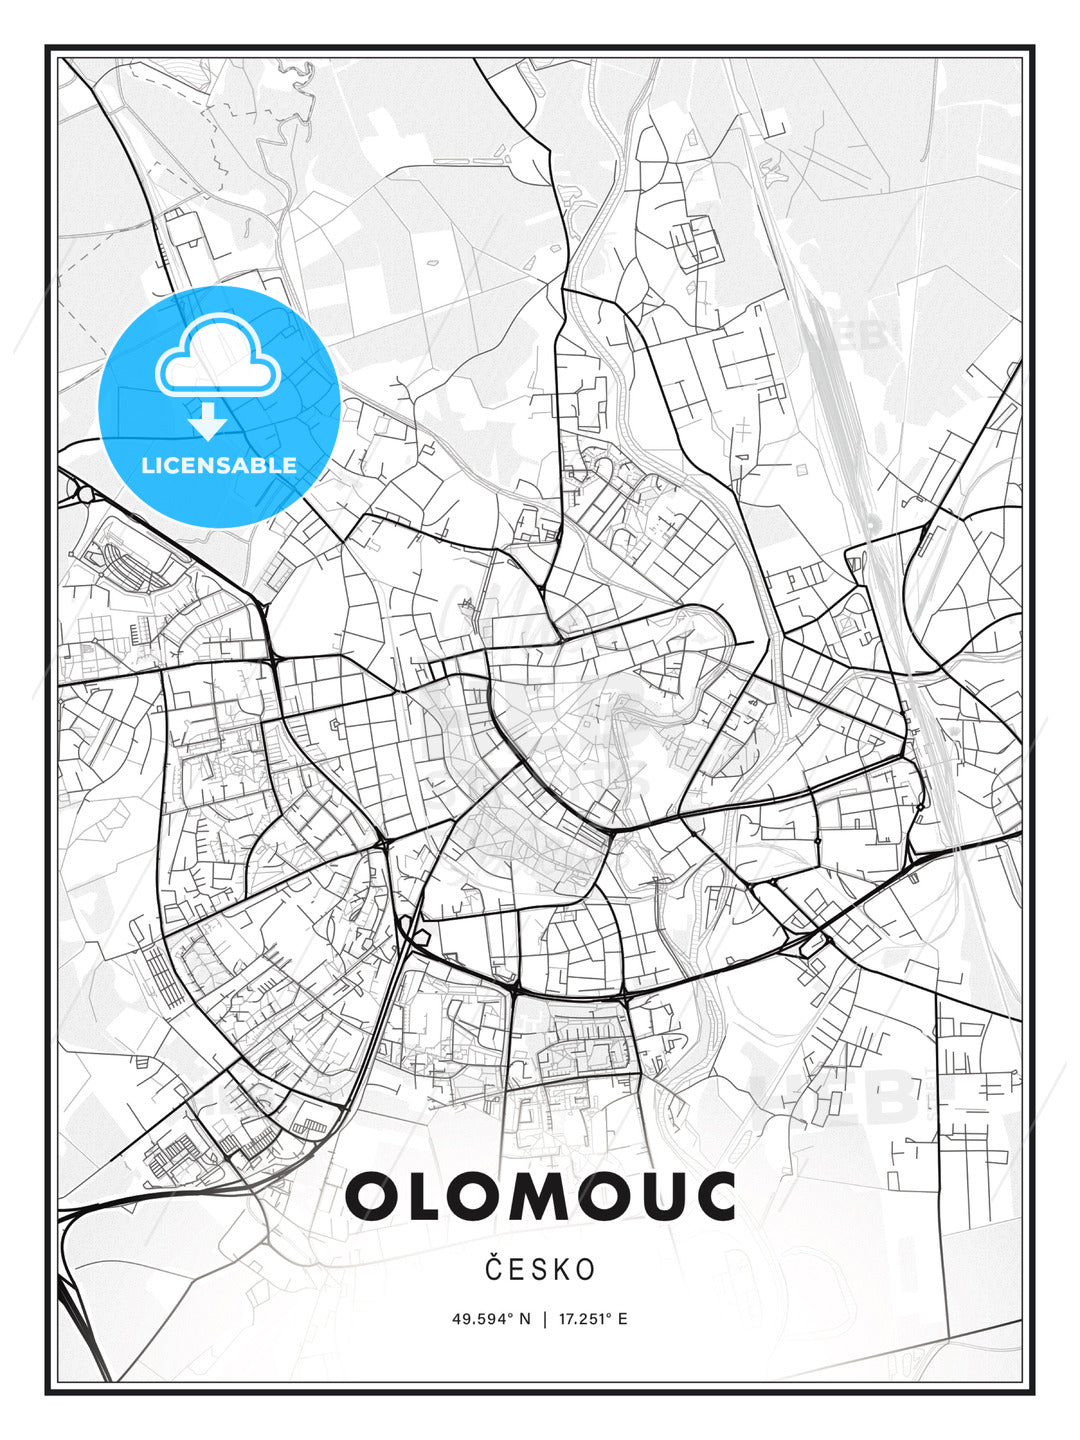 Olomouc, Czechia, Modern Print Template in Various Formats - HEBSTREITS Sketches